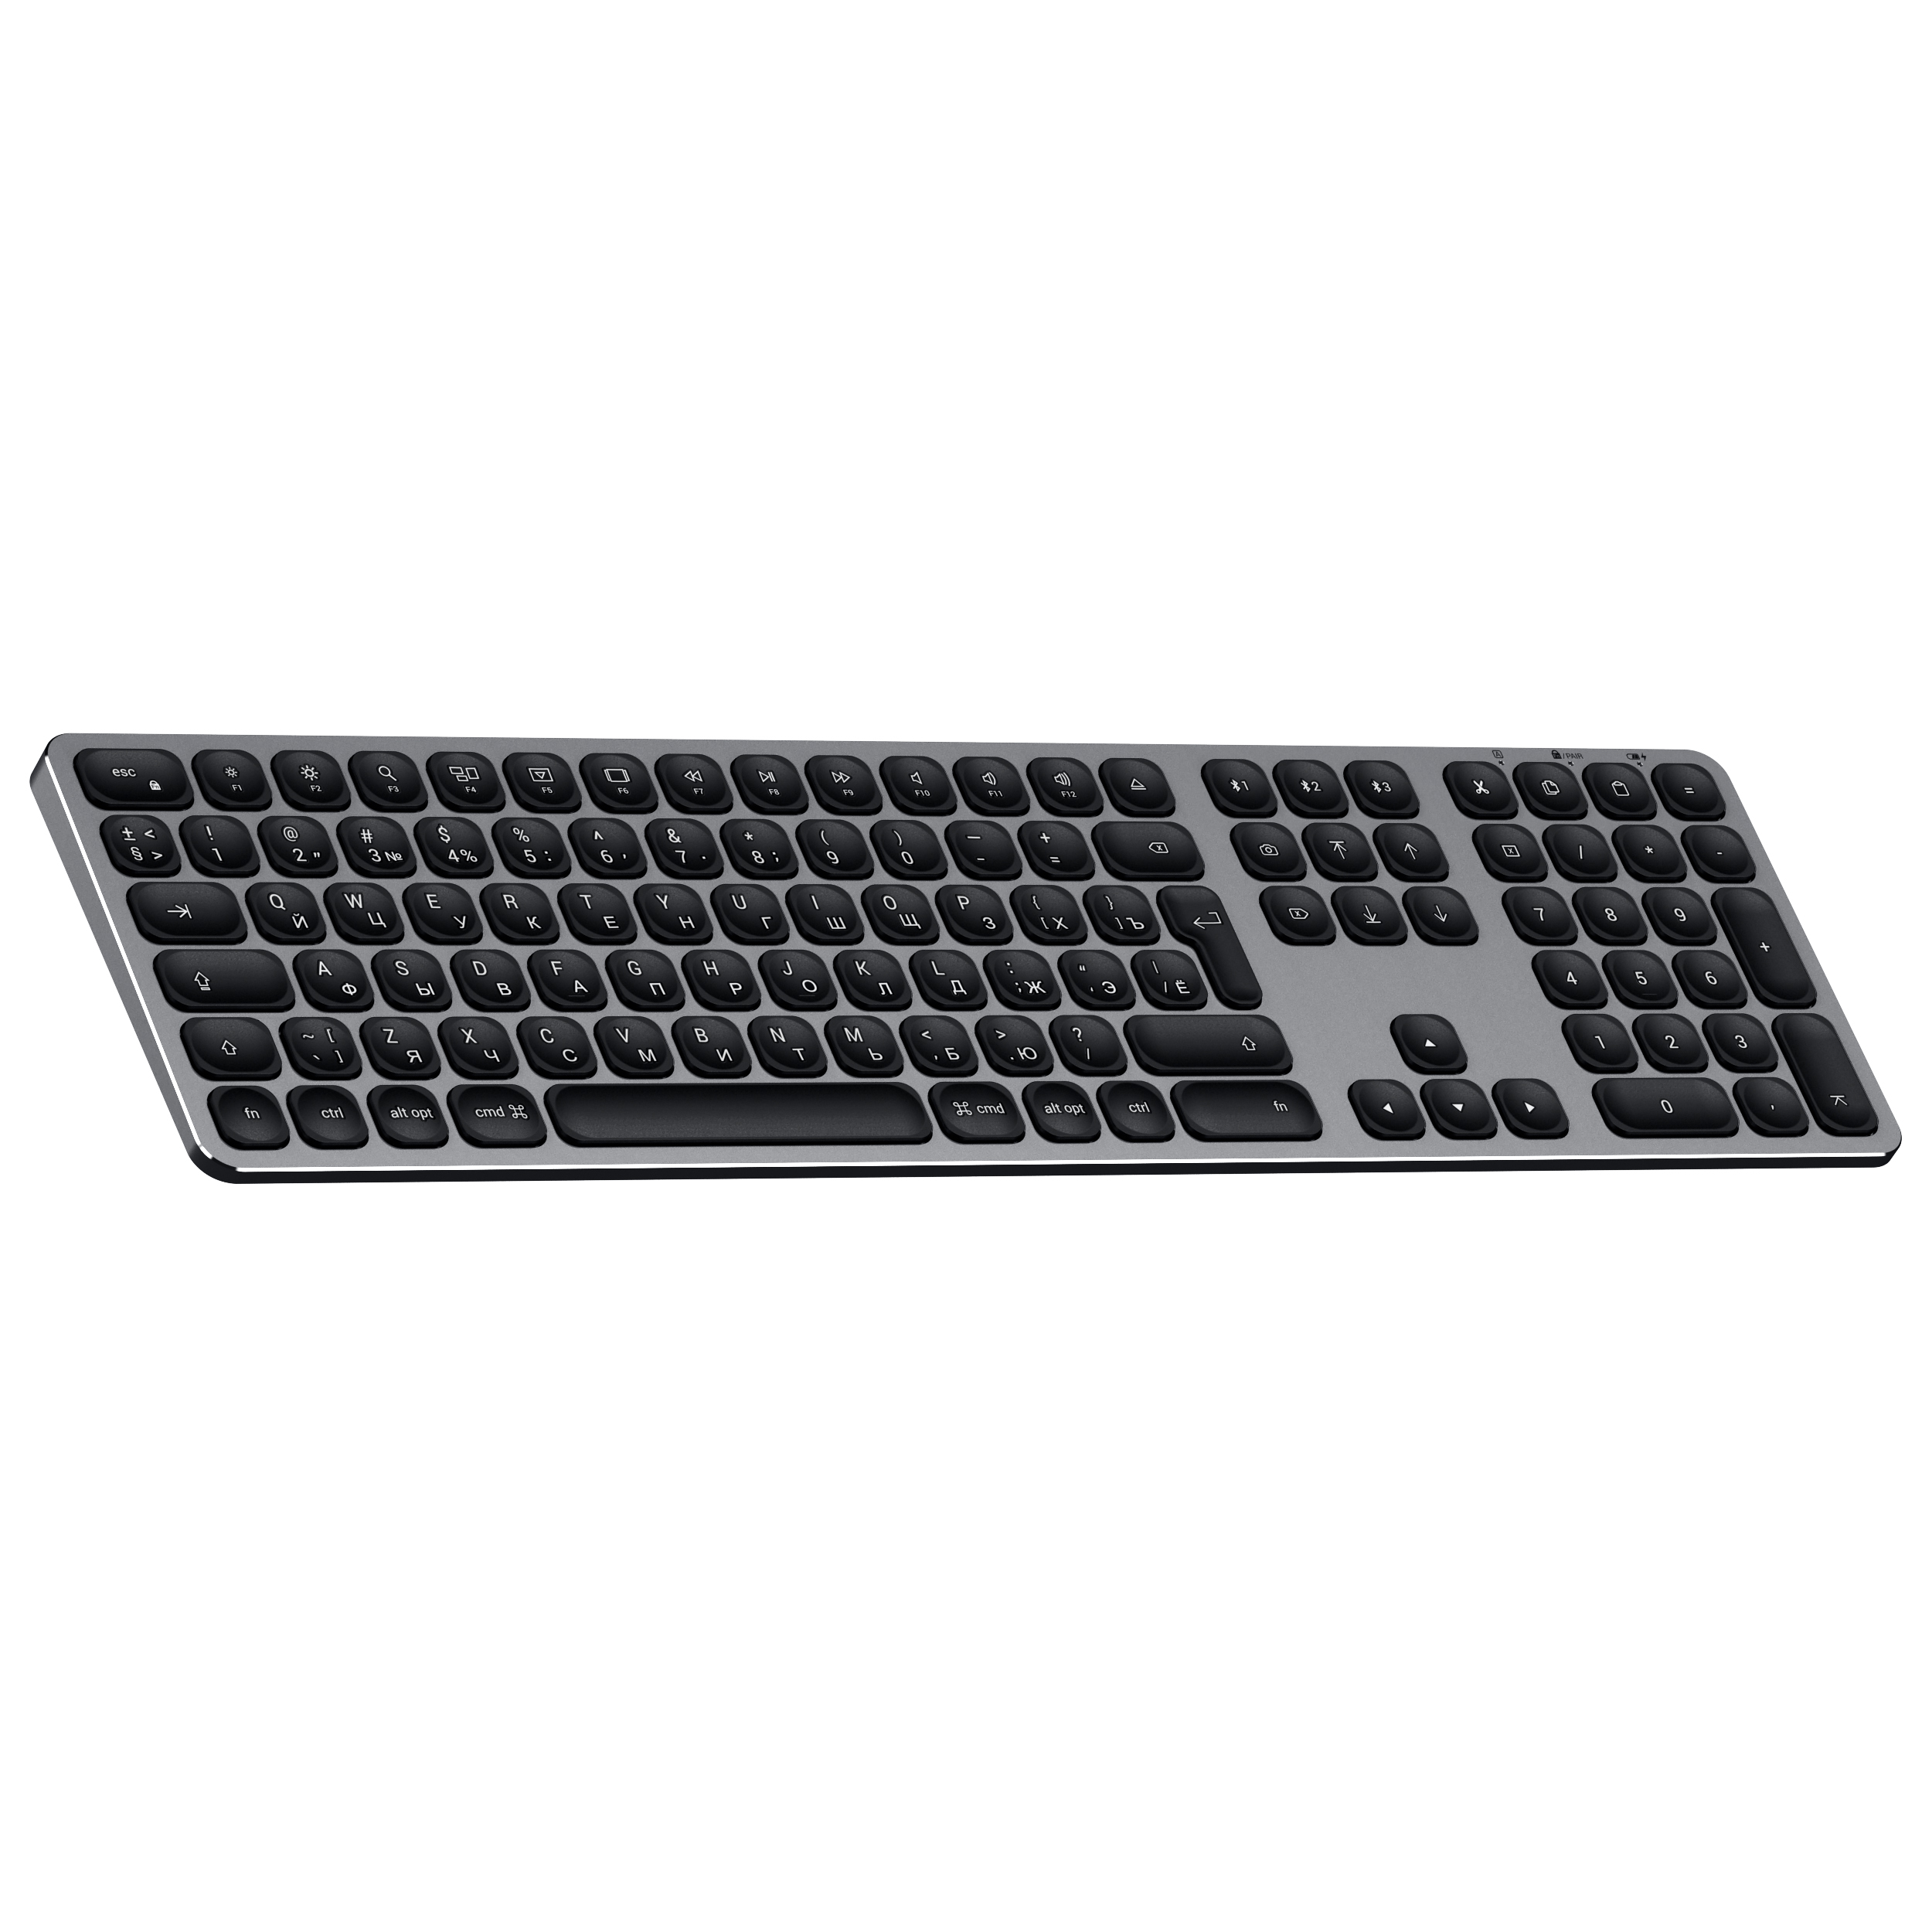 SATECHI_KEYBOARD_rounded_RUSSIAN_WIRELESS_spacegray_10_REV.jpg